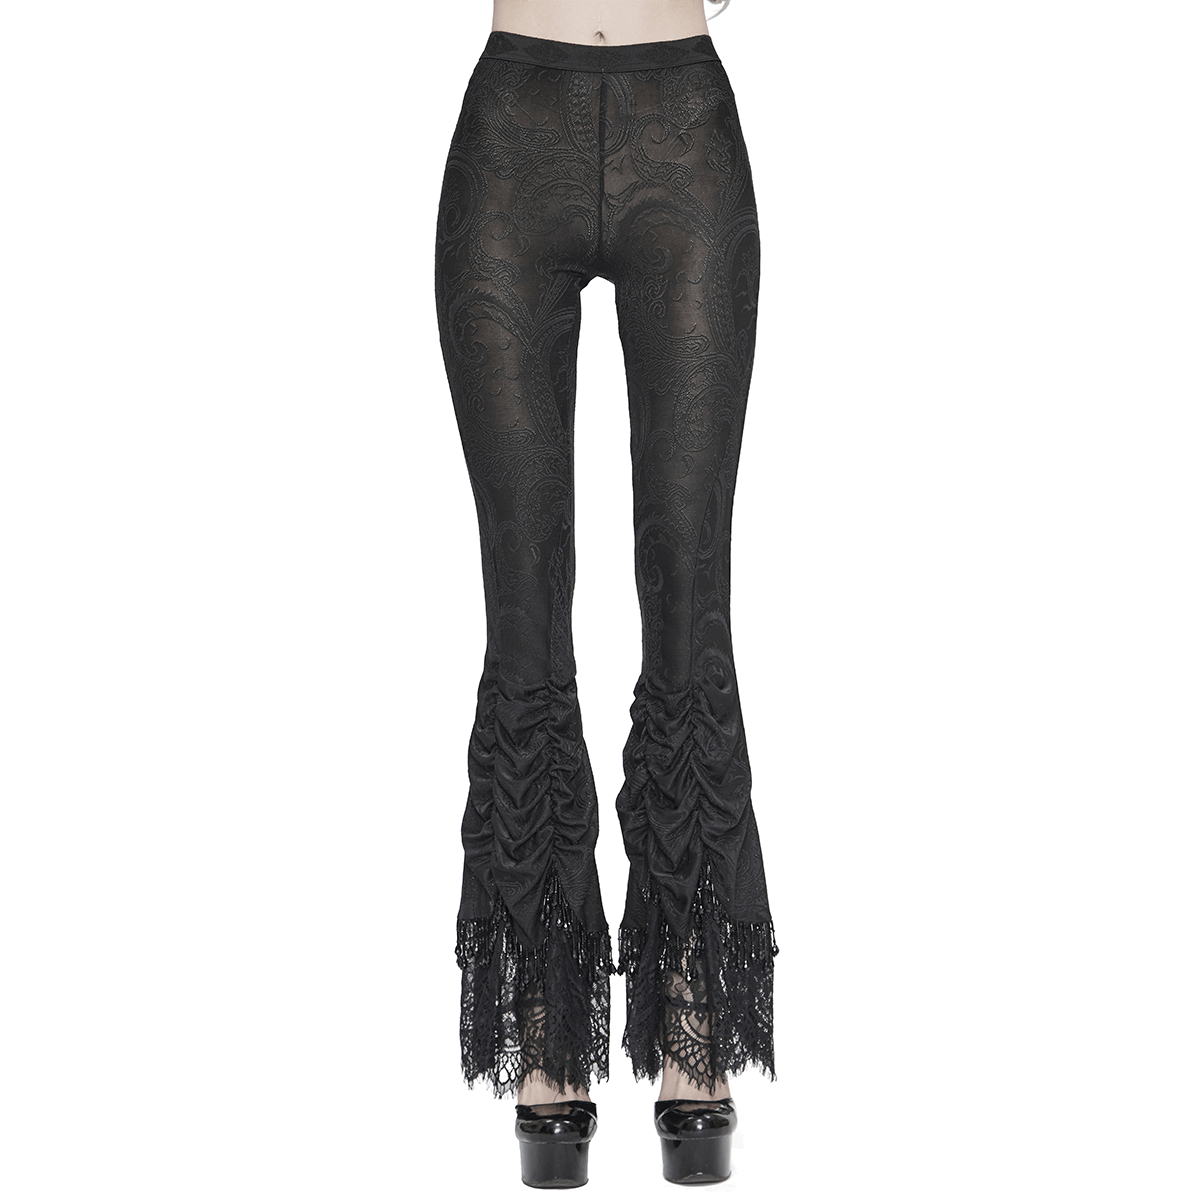 https://hardnheavy.style/cdn/shop/products/womens-vintage-gothic-black-laced-trimmed-flared-trousers-sexy-ladies-alternative-clothing-018_84d771d2-208e-4b8a-b96f-b1d198bca562.png?v=1679105623